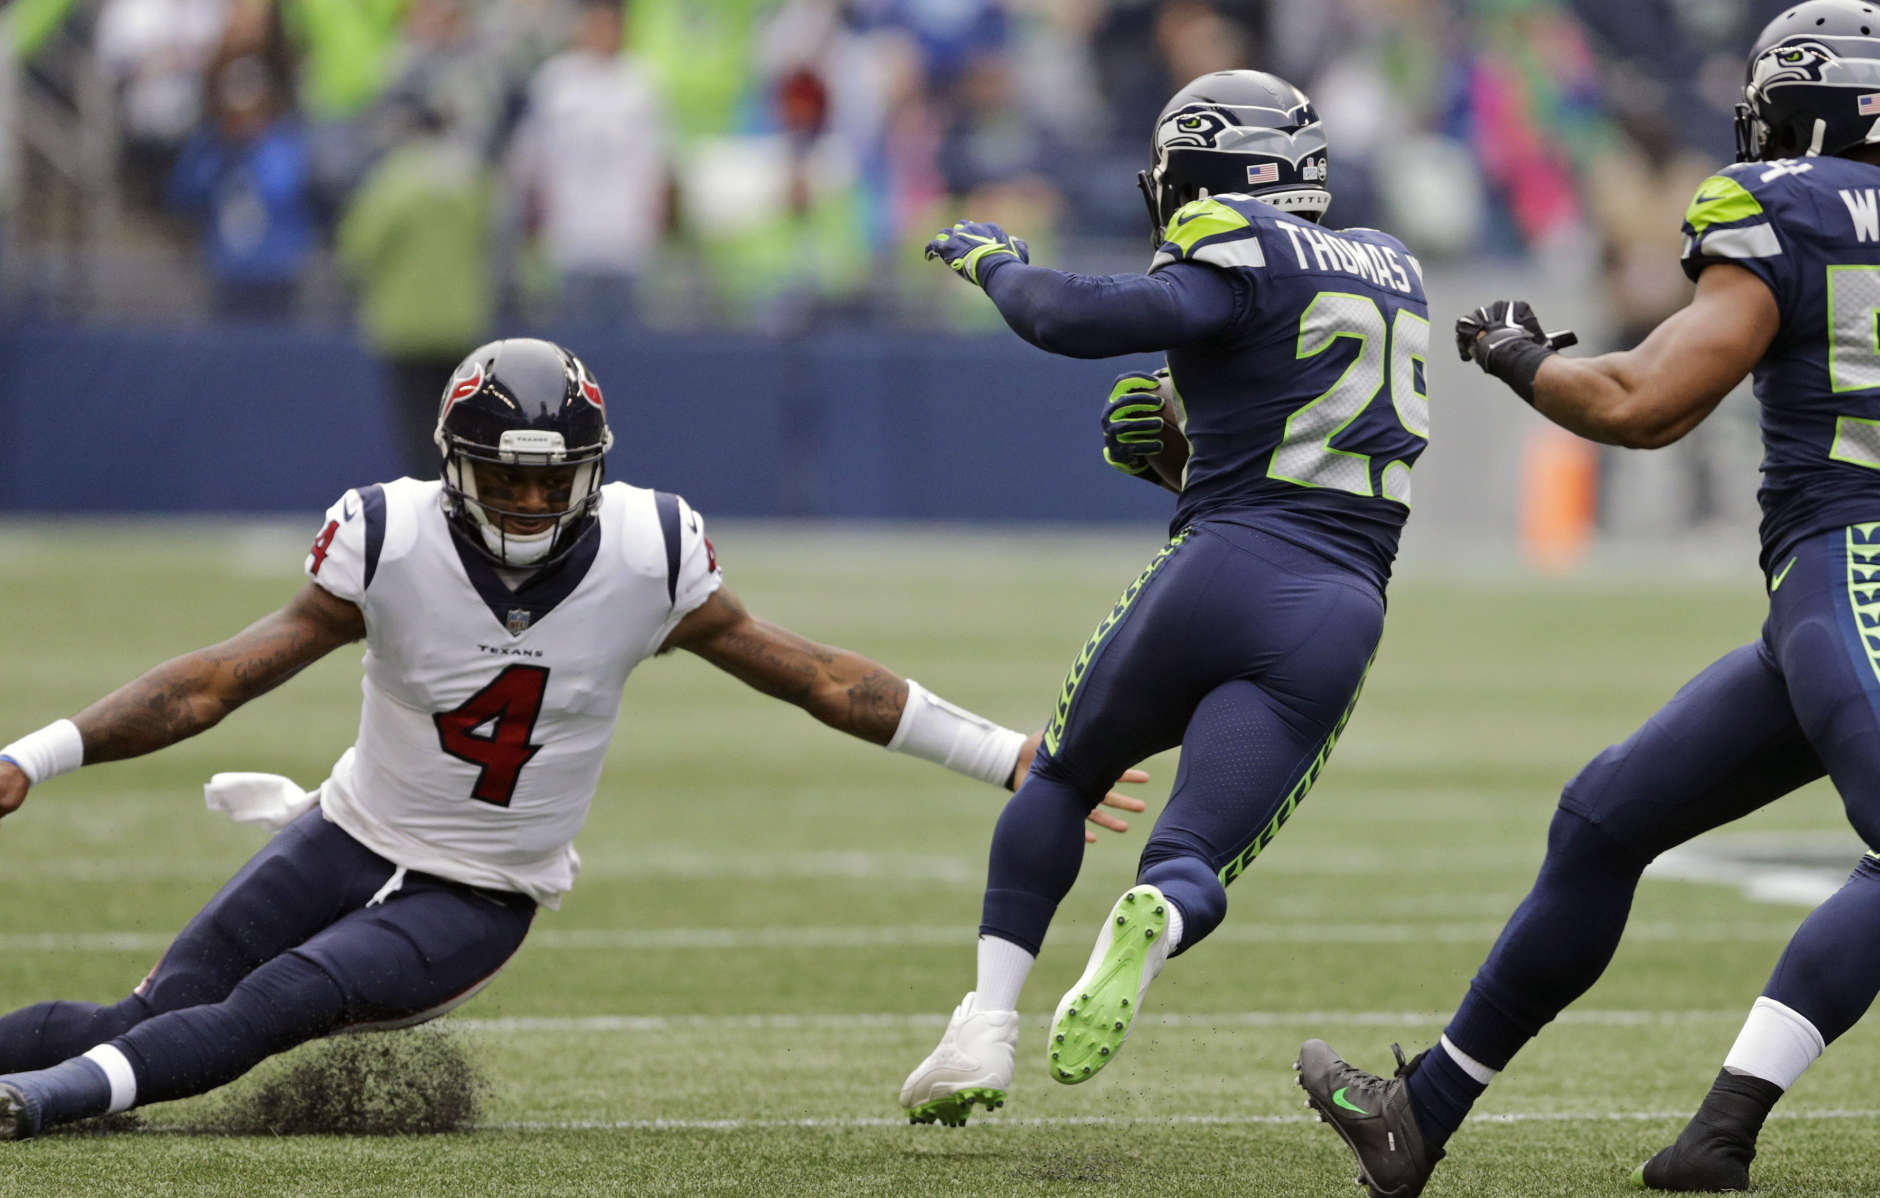 Seattle Seahawks free safety Earl Thomas, second from left, avoids a tackle-attempt by Houston Texans quarterback Deshaun Watson (4) after intercepting a pass from Watson in the first half of an NFL football game, Sunday, Oct. 29, 2017, in Seattle. Thomas returned the interception 78 yards for a touchdown. (AP Photo/Stephen Brashear)